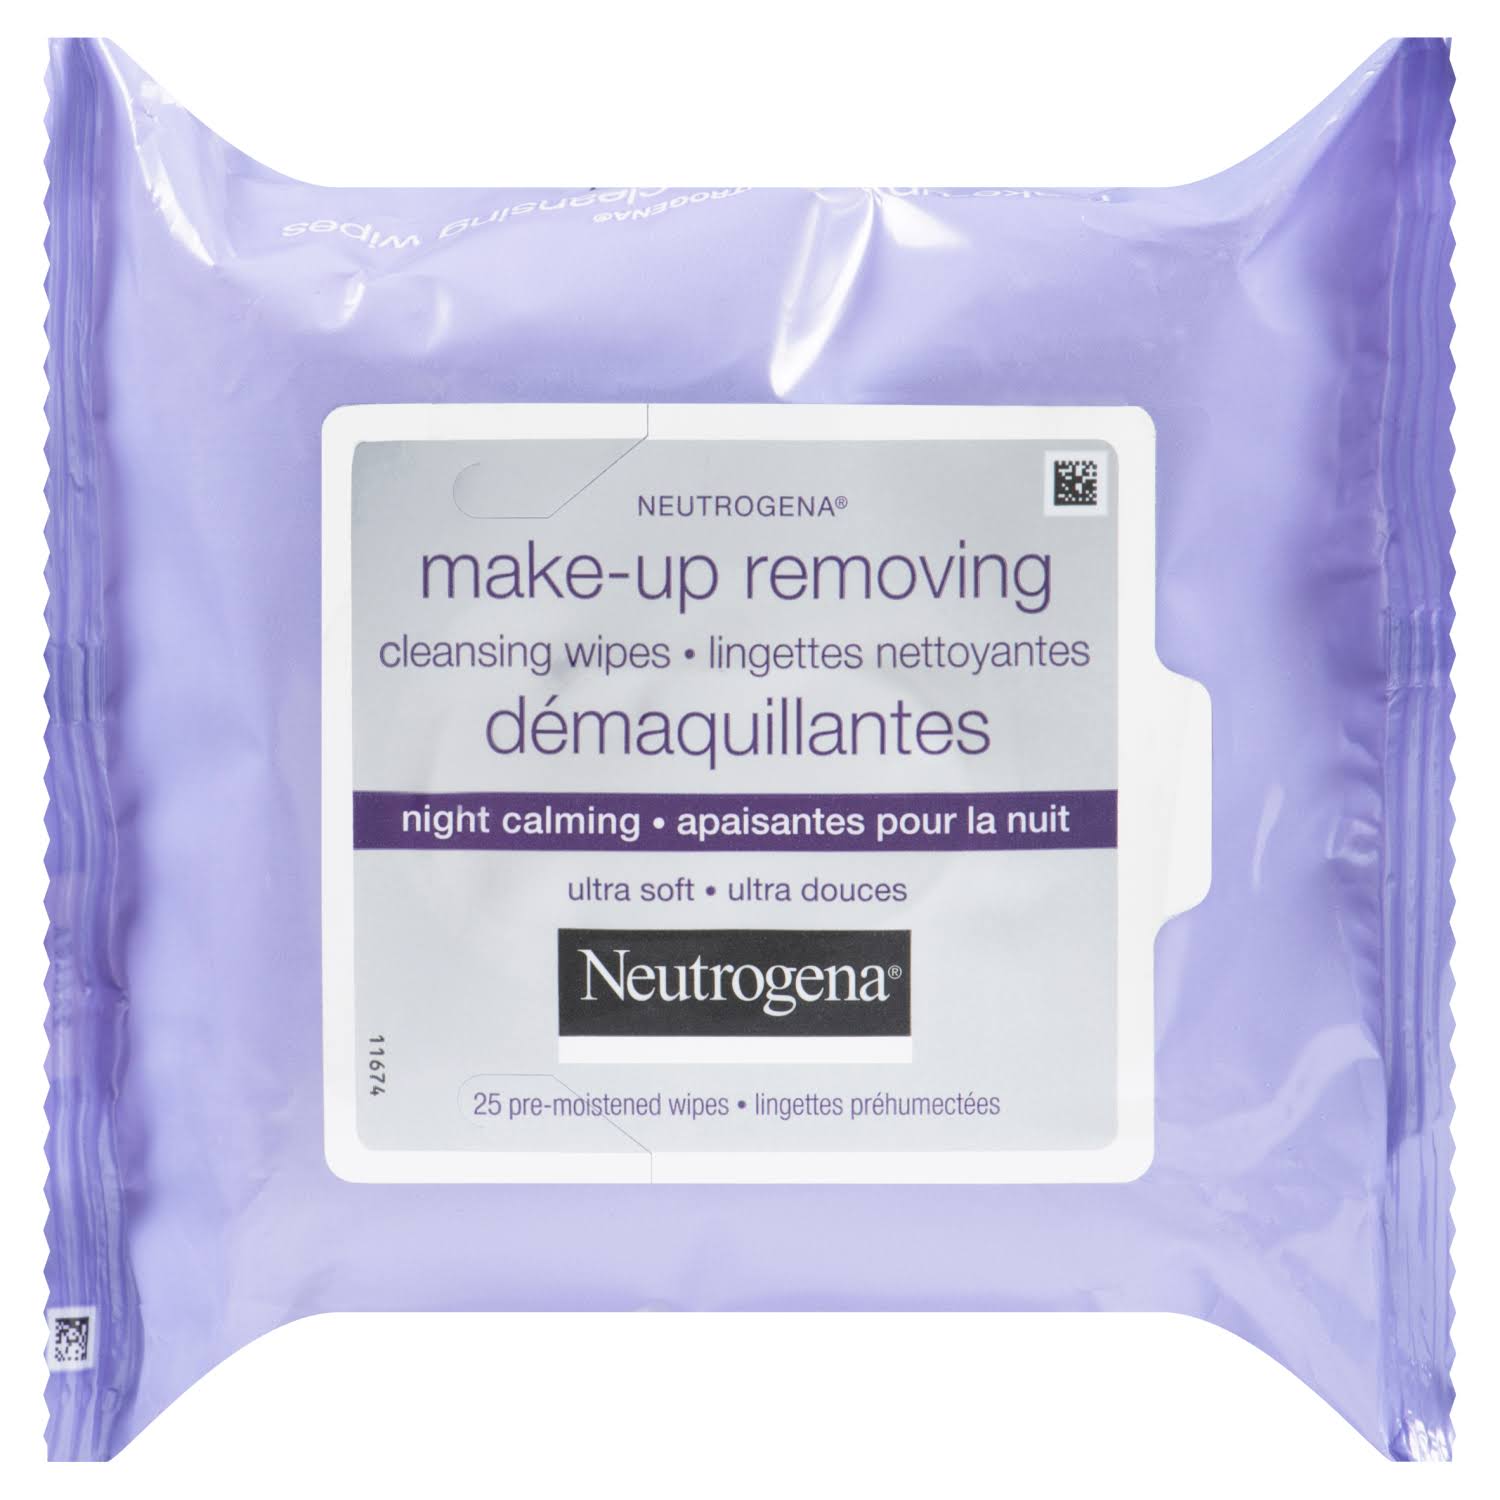 Neutrogena Make-Up Removing Cleansing Wipes Night Calming 25.0 Wipes